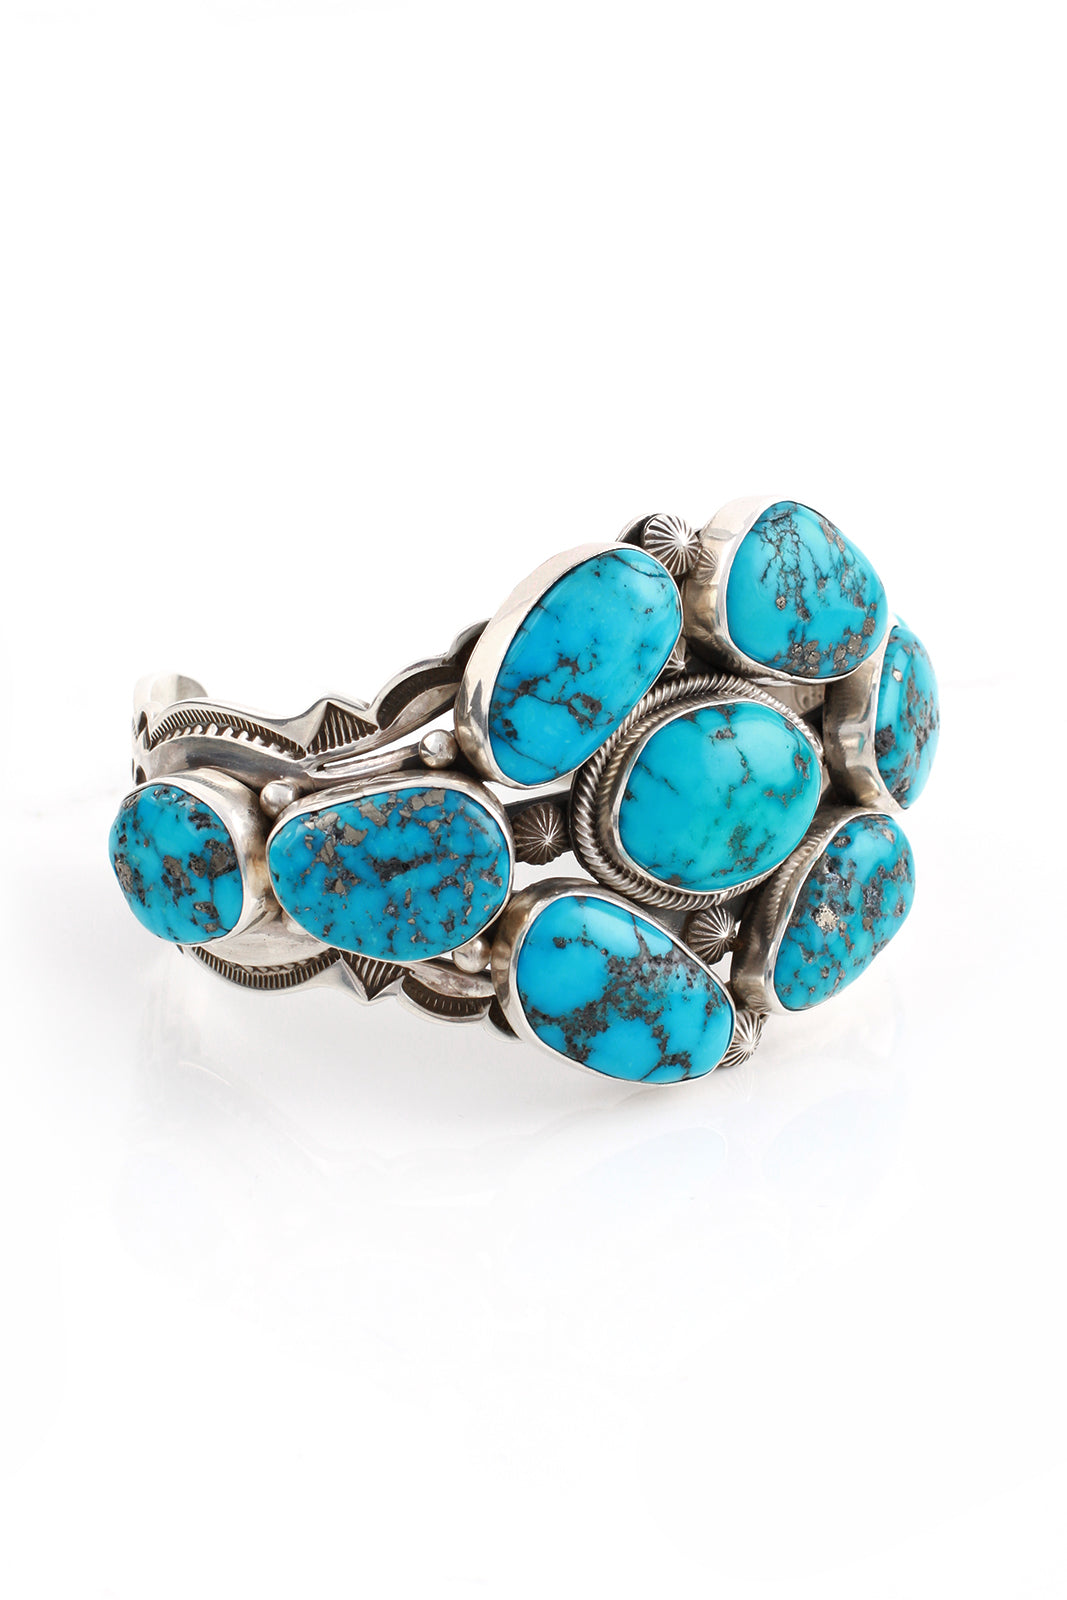 Silver Eagle Gallery | Aaron Toadlena Blue Turquoise Cuff